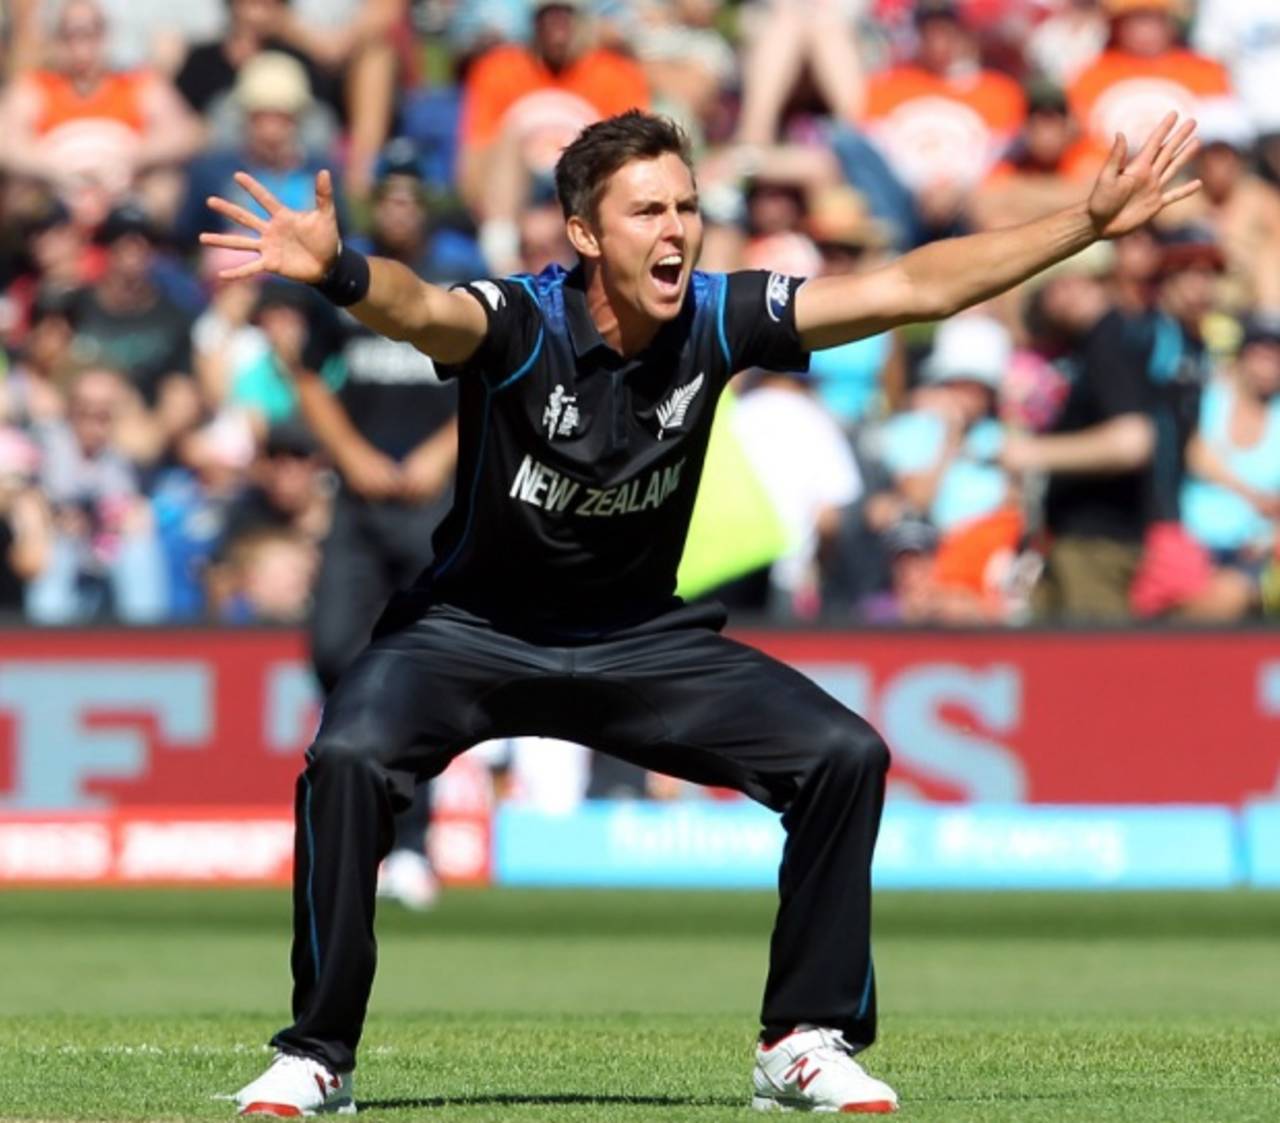 Trent Boult struck twice in his first over , New Zealand v Scotland, World Cup 2015, Group A, Dunedin, February 17, 2015